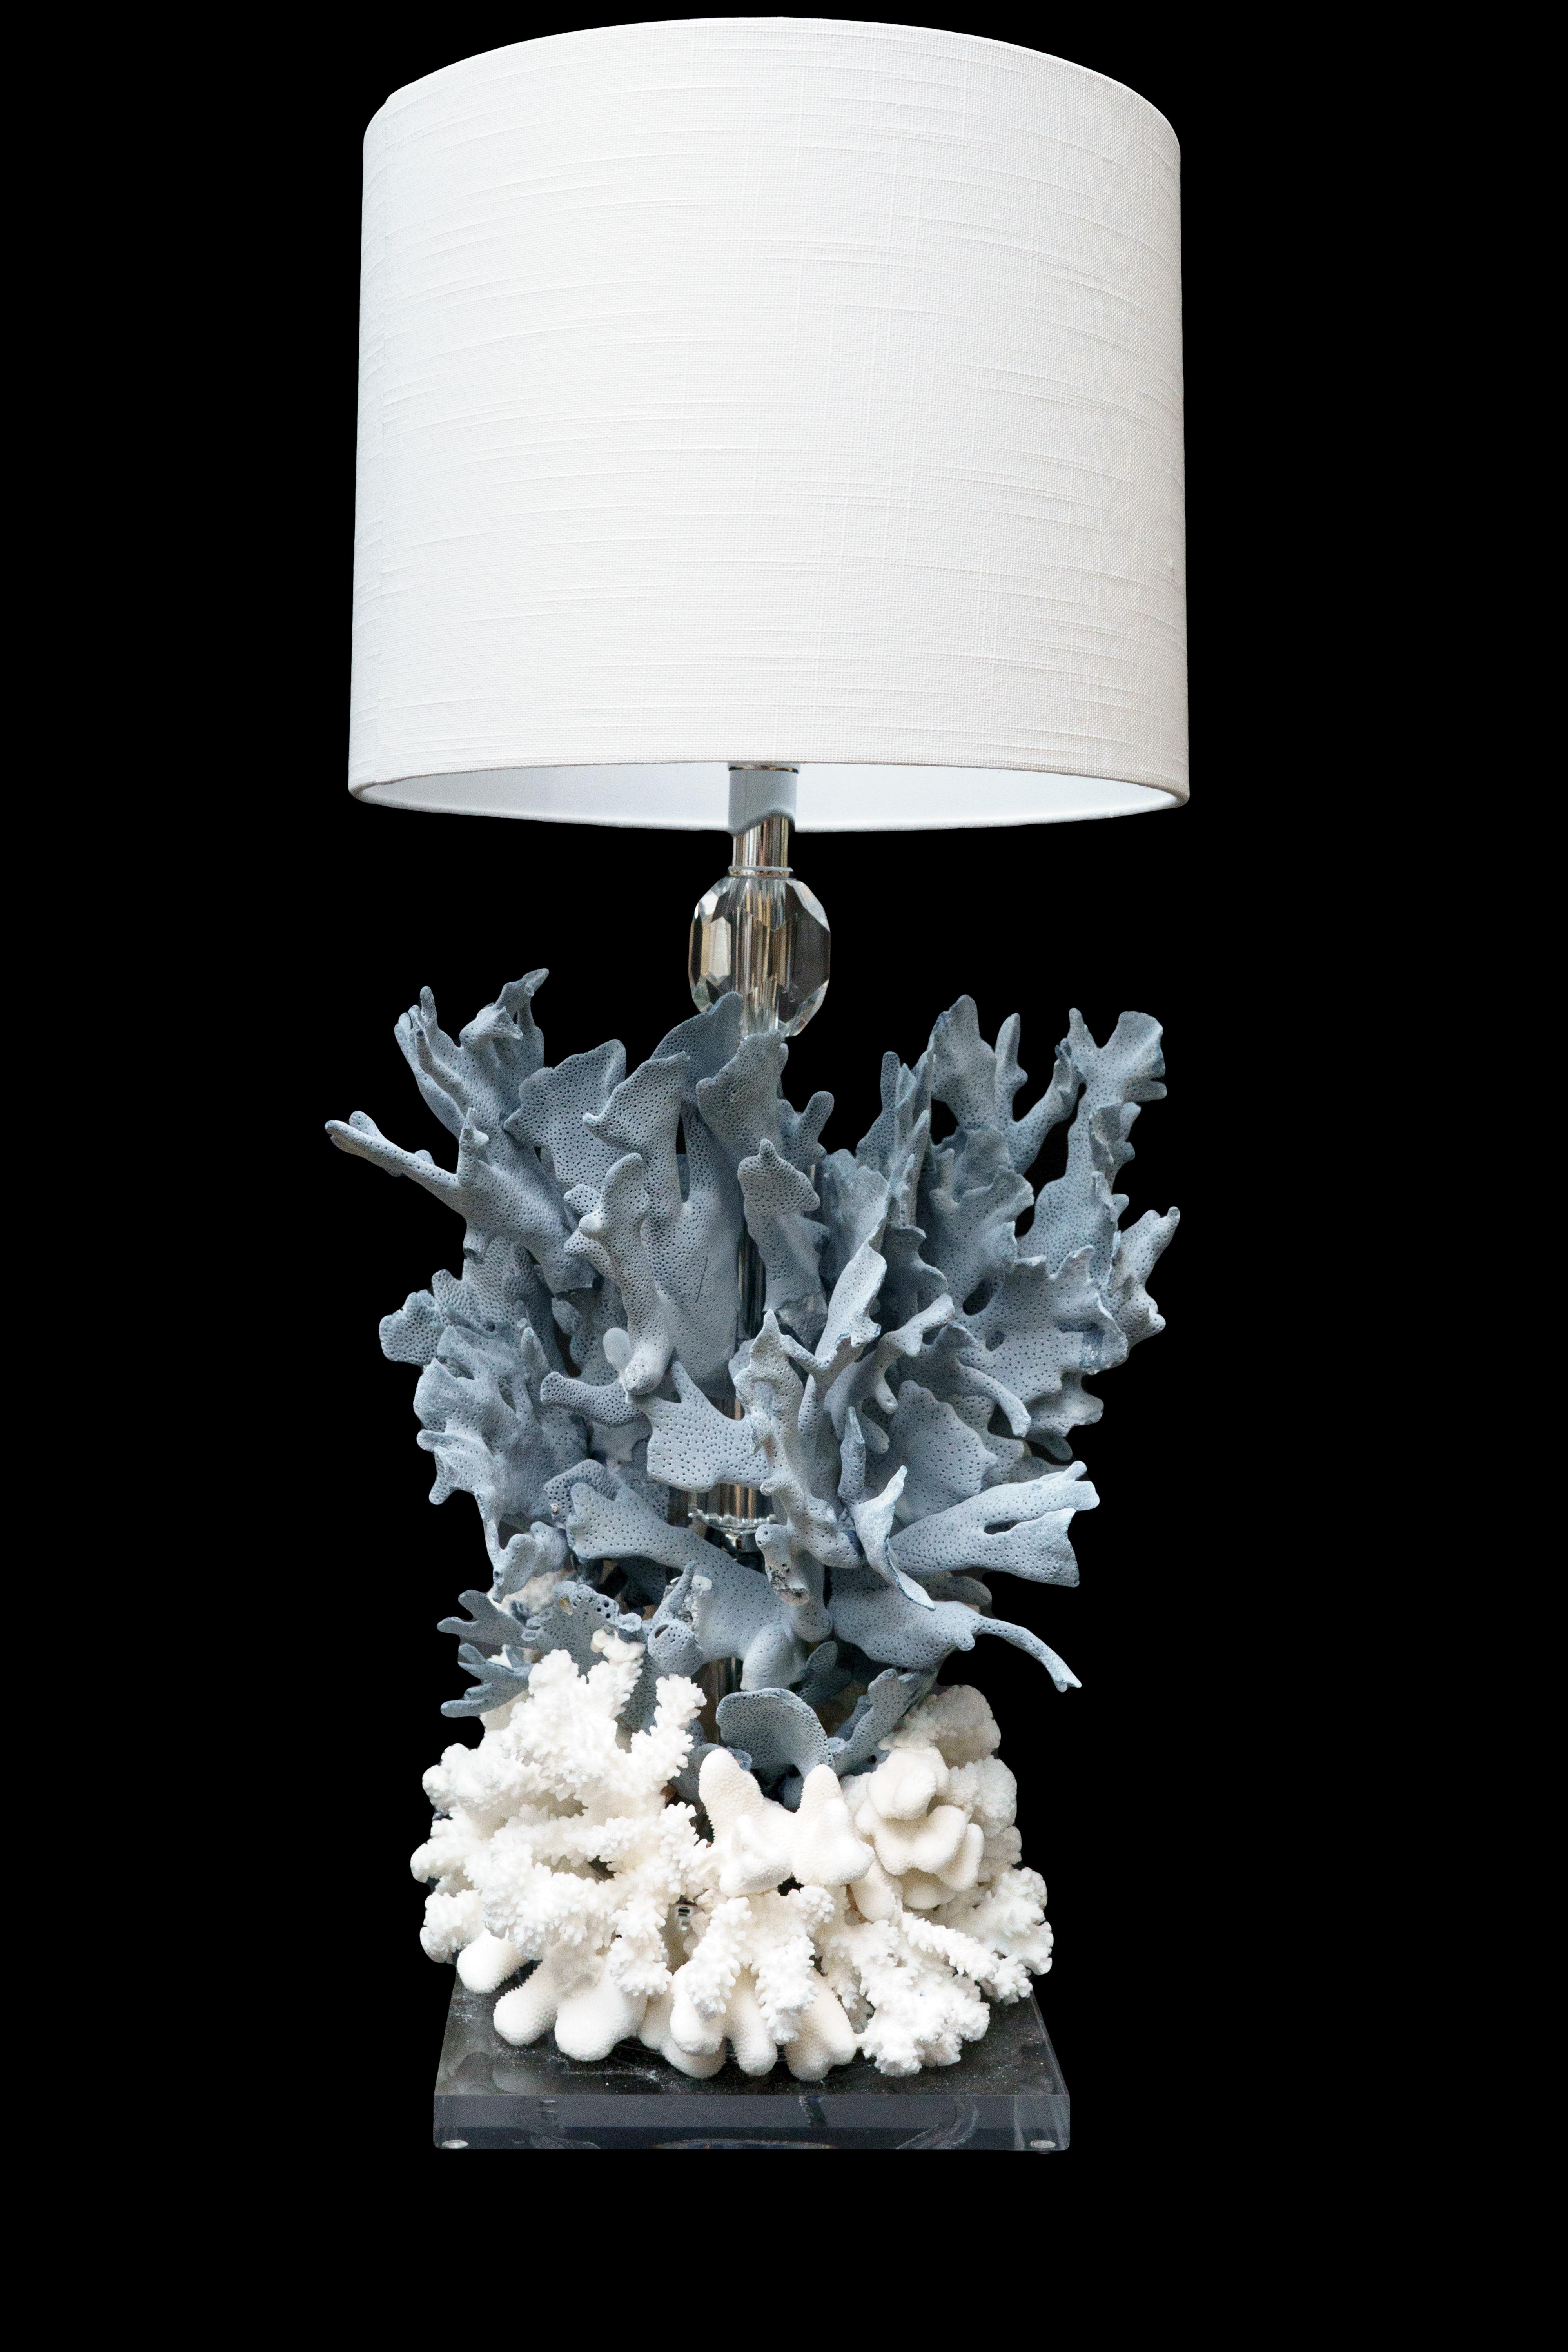 Blue coral creation lamp:

Measures: 12